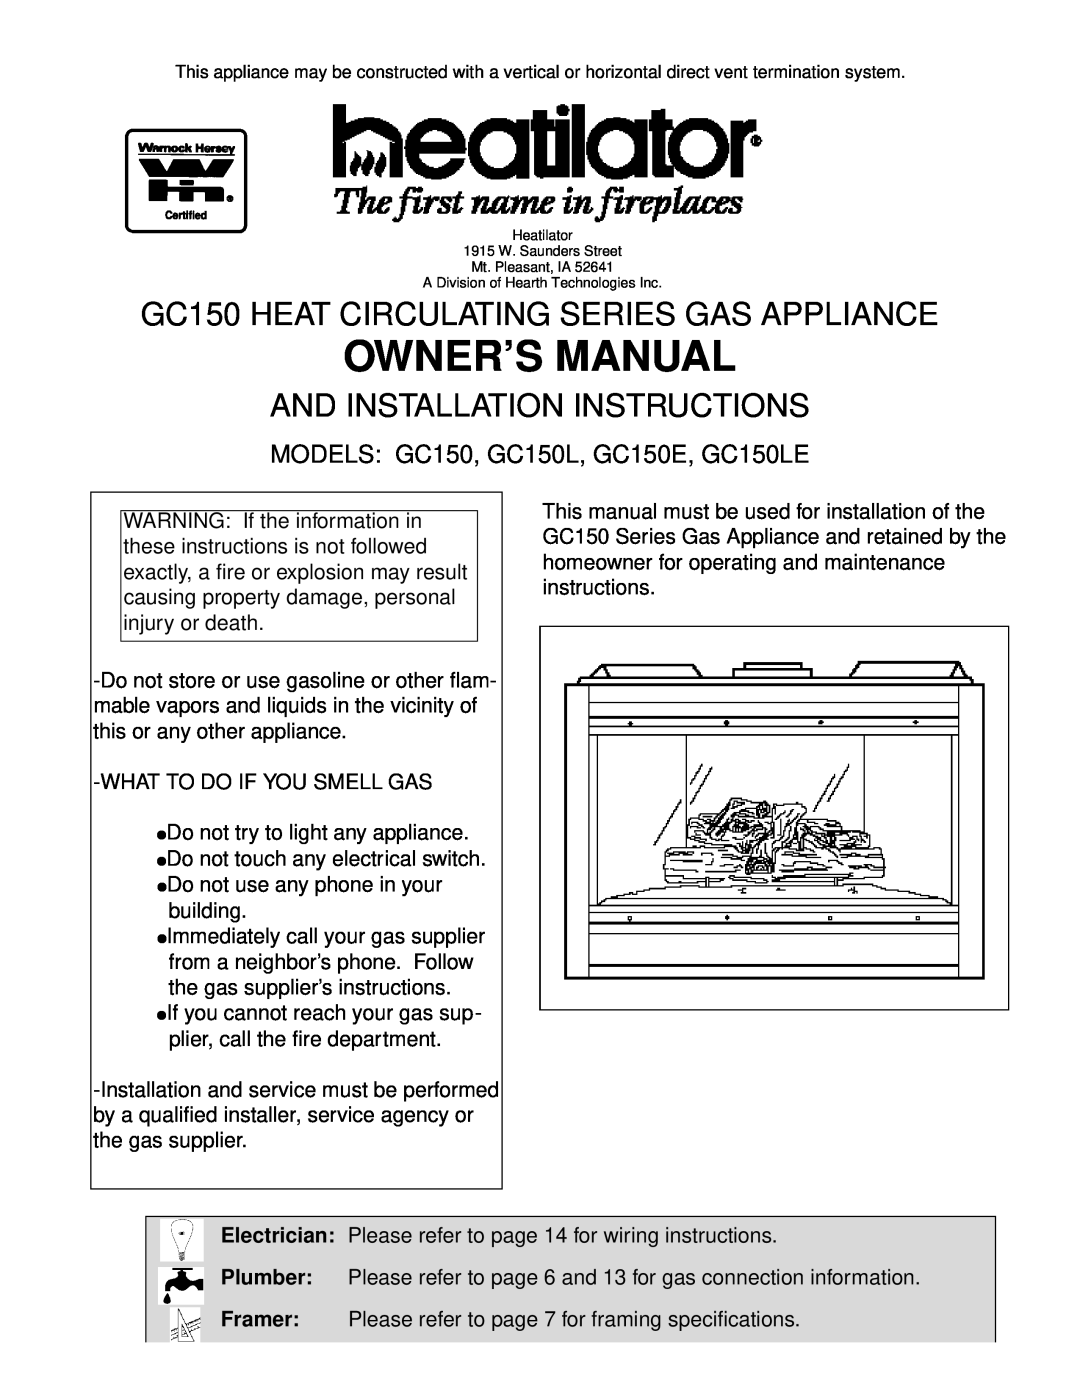 Heatiator owner manual GC150 HEAT CIRCULATING SERIES GAS APPLIANCE, And Installation Instructions 